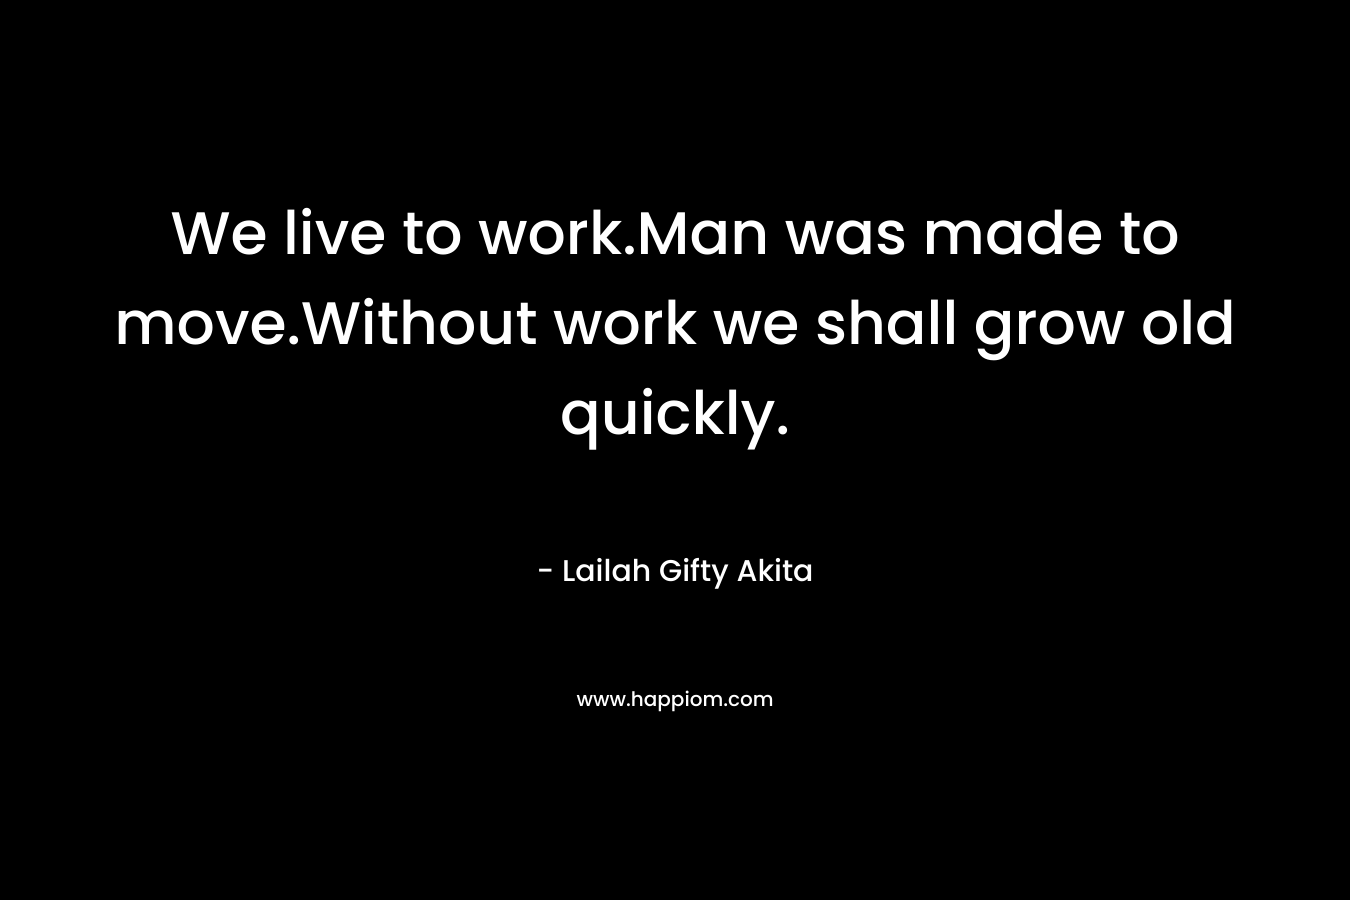 We live to work.Man was made to move.Without work we shall grow old quickly. – Lailah Gifty Akita